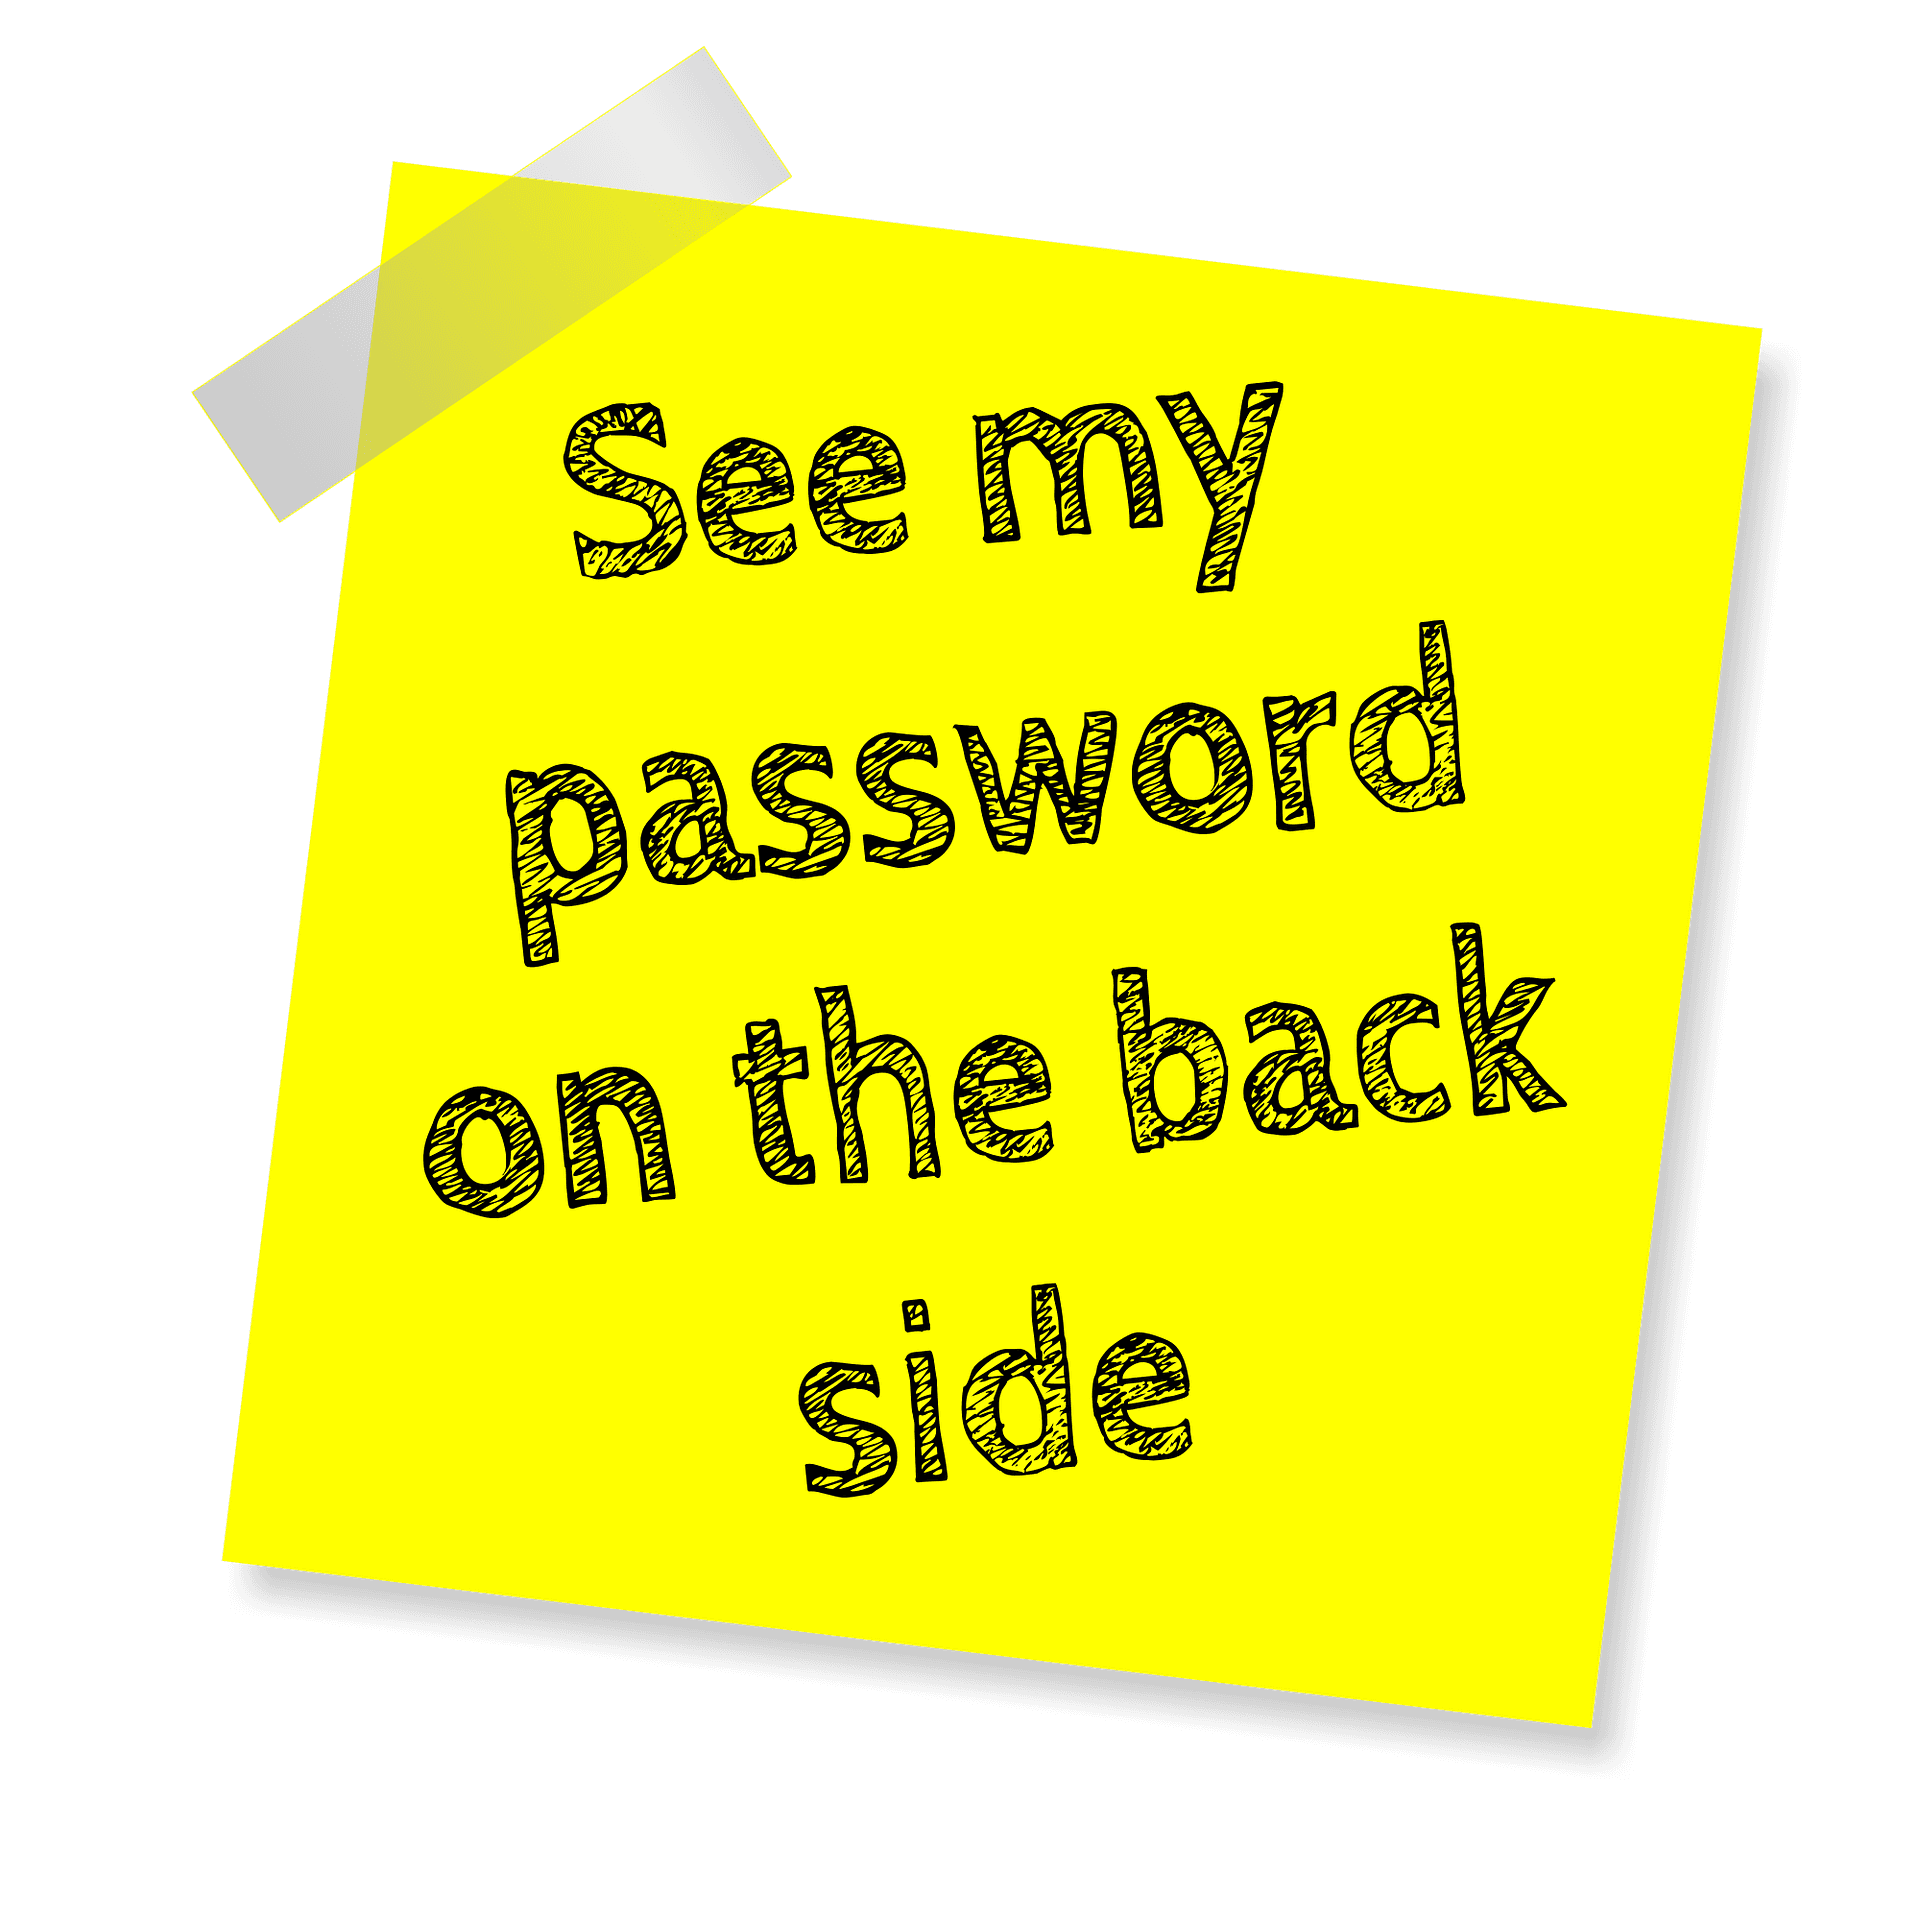 Passwords and sticky notes